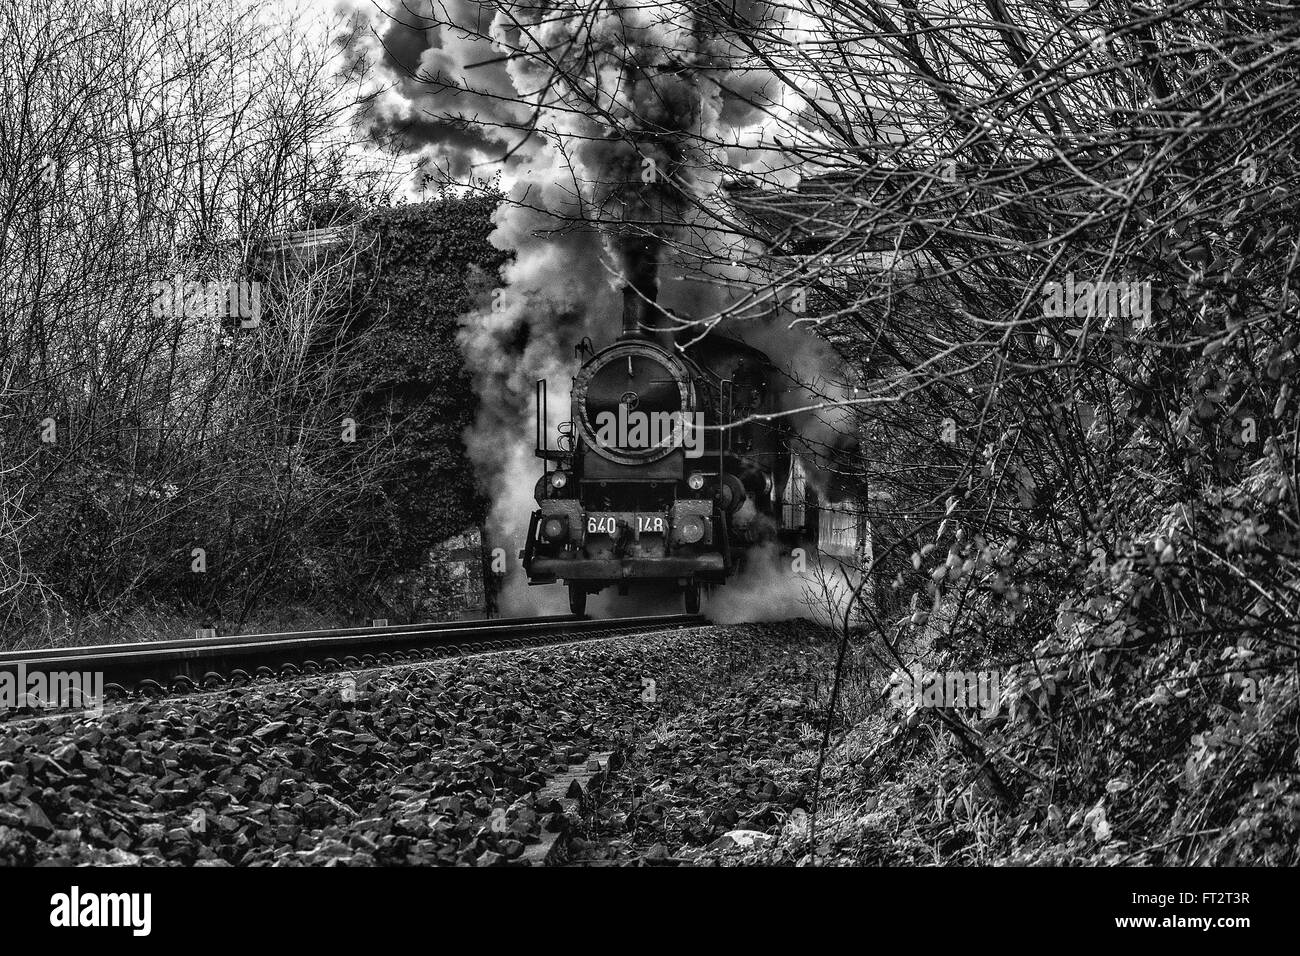 AN OLD STEAM LOCOMOTIVE IN ALL HIS CHARM Stock Photo